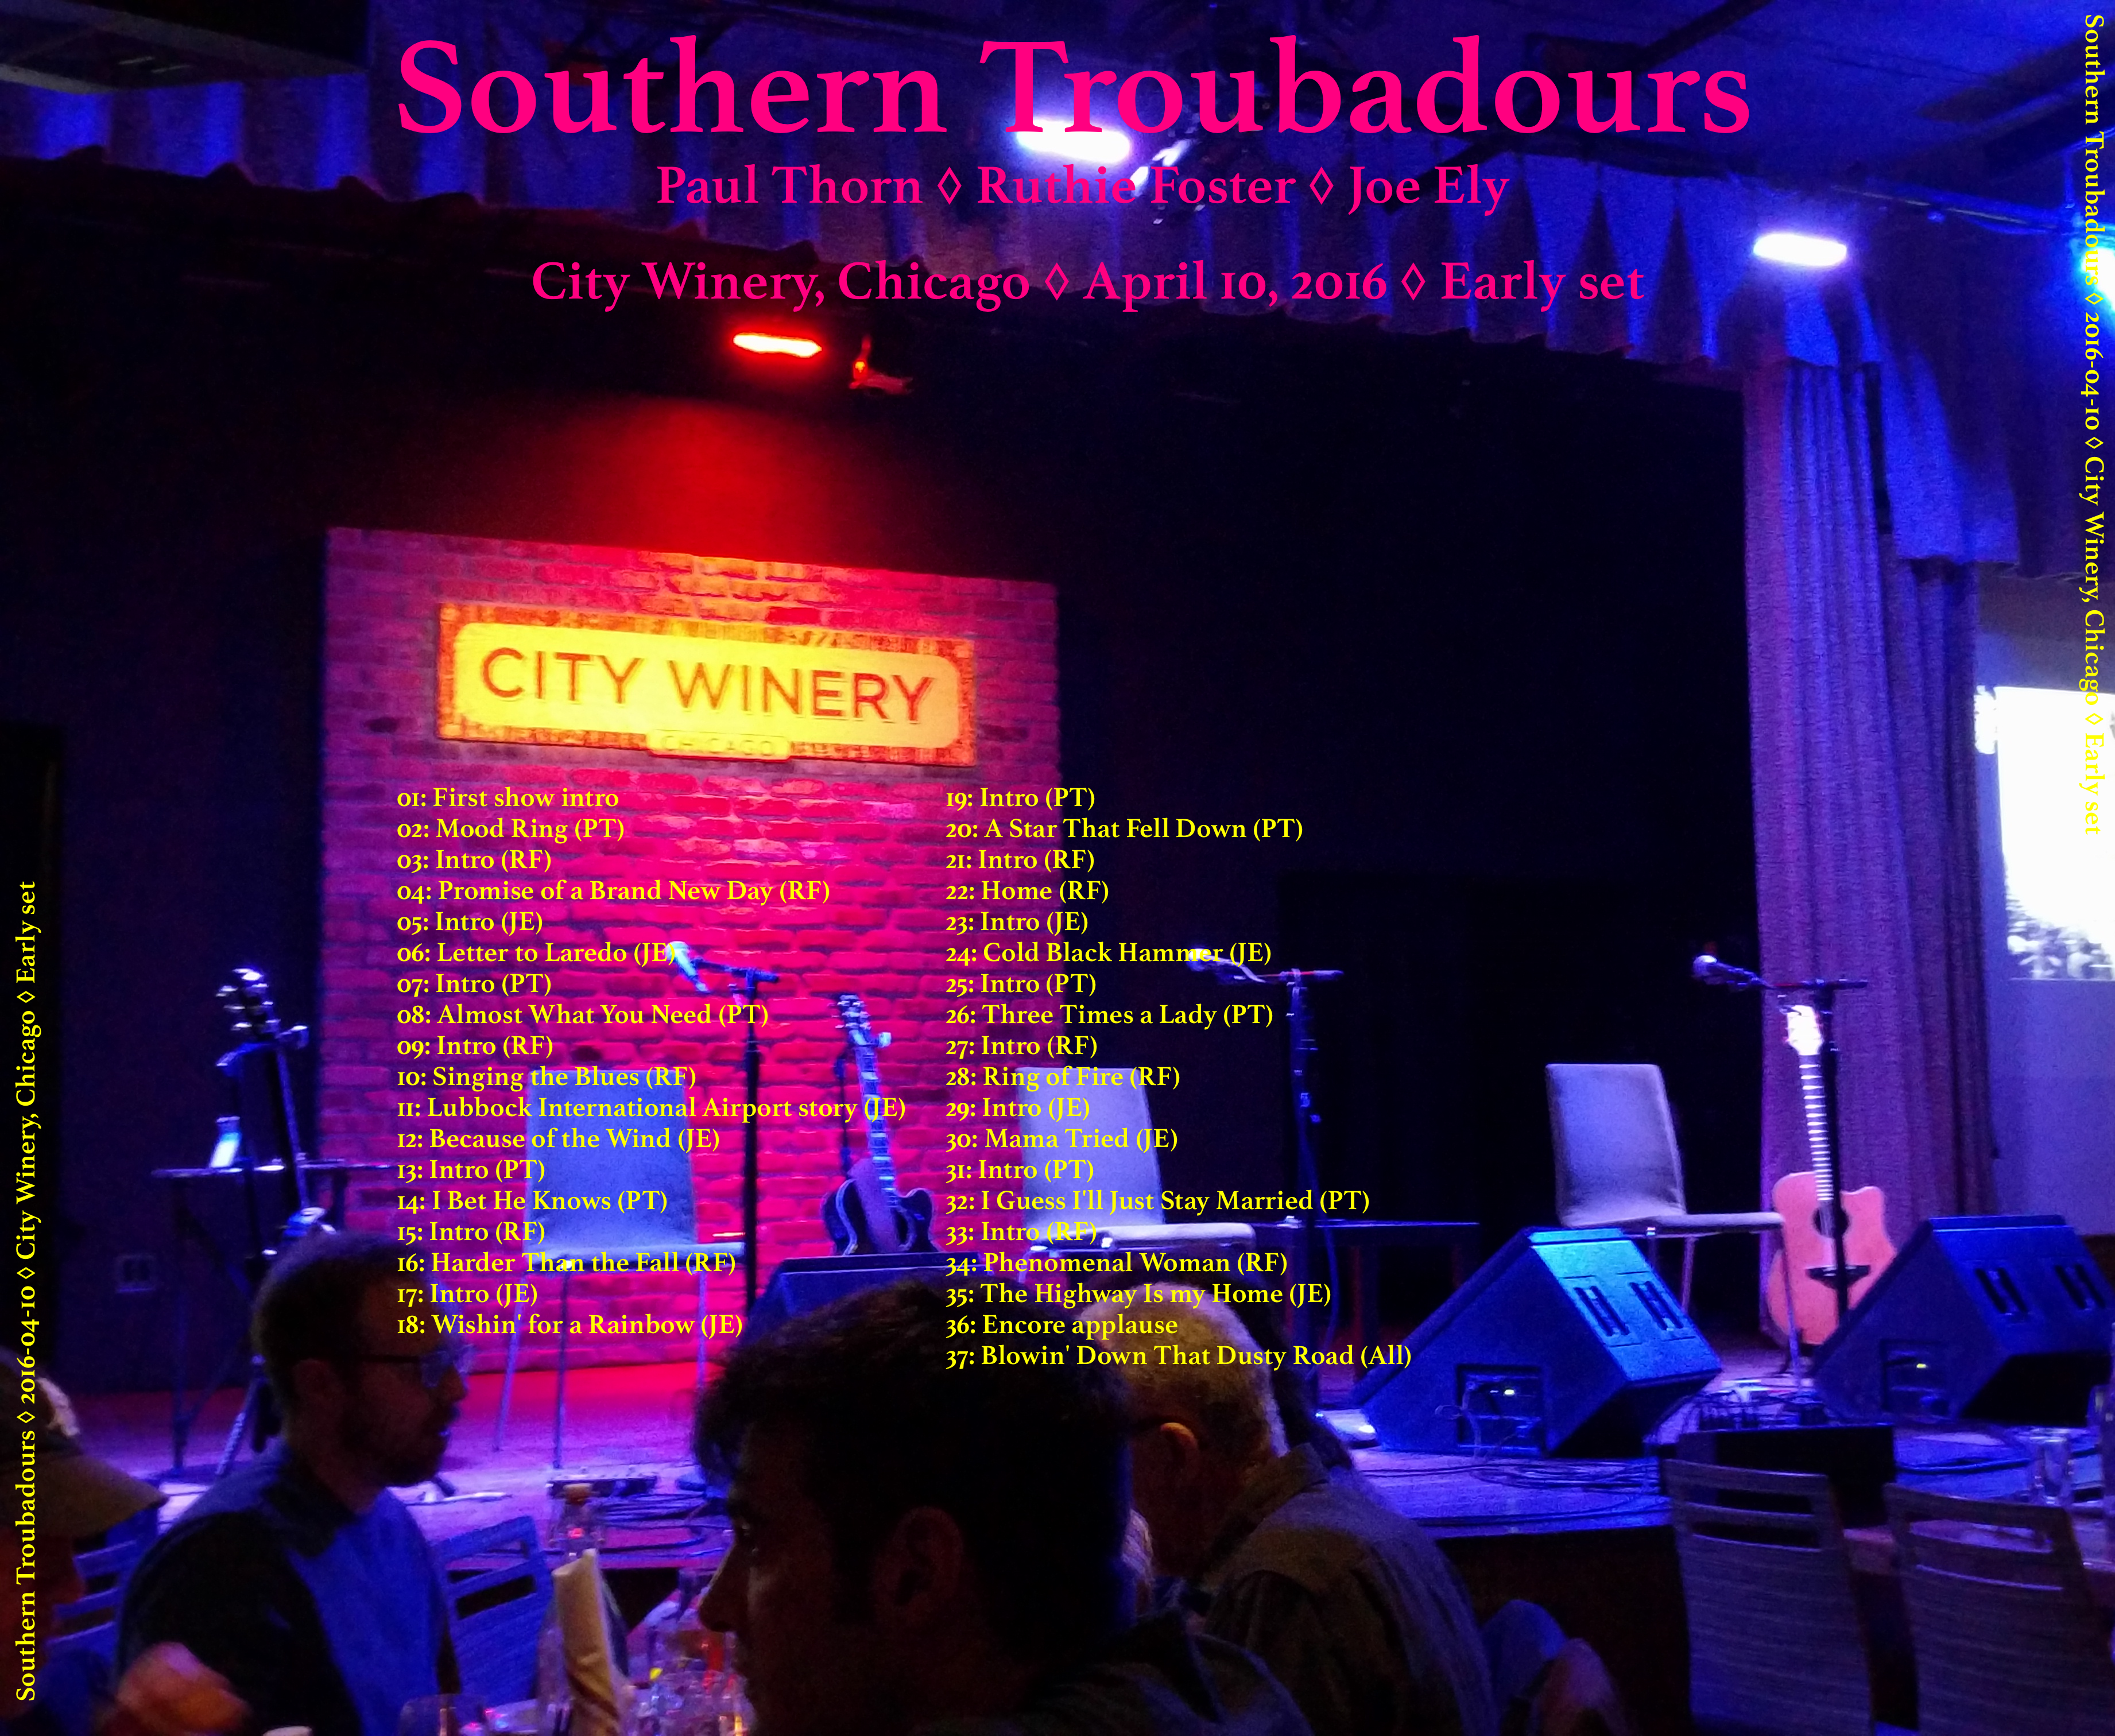 SouthernTroubadours2016-04-10CityWineryChicagoIL (4).png